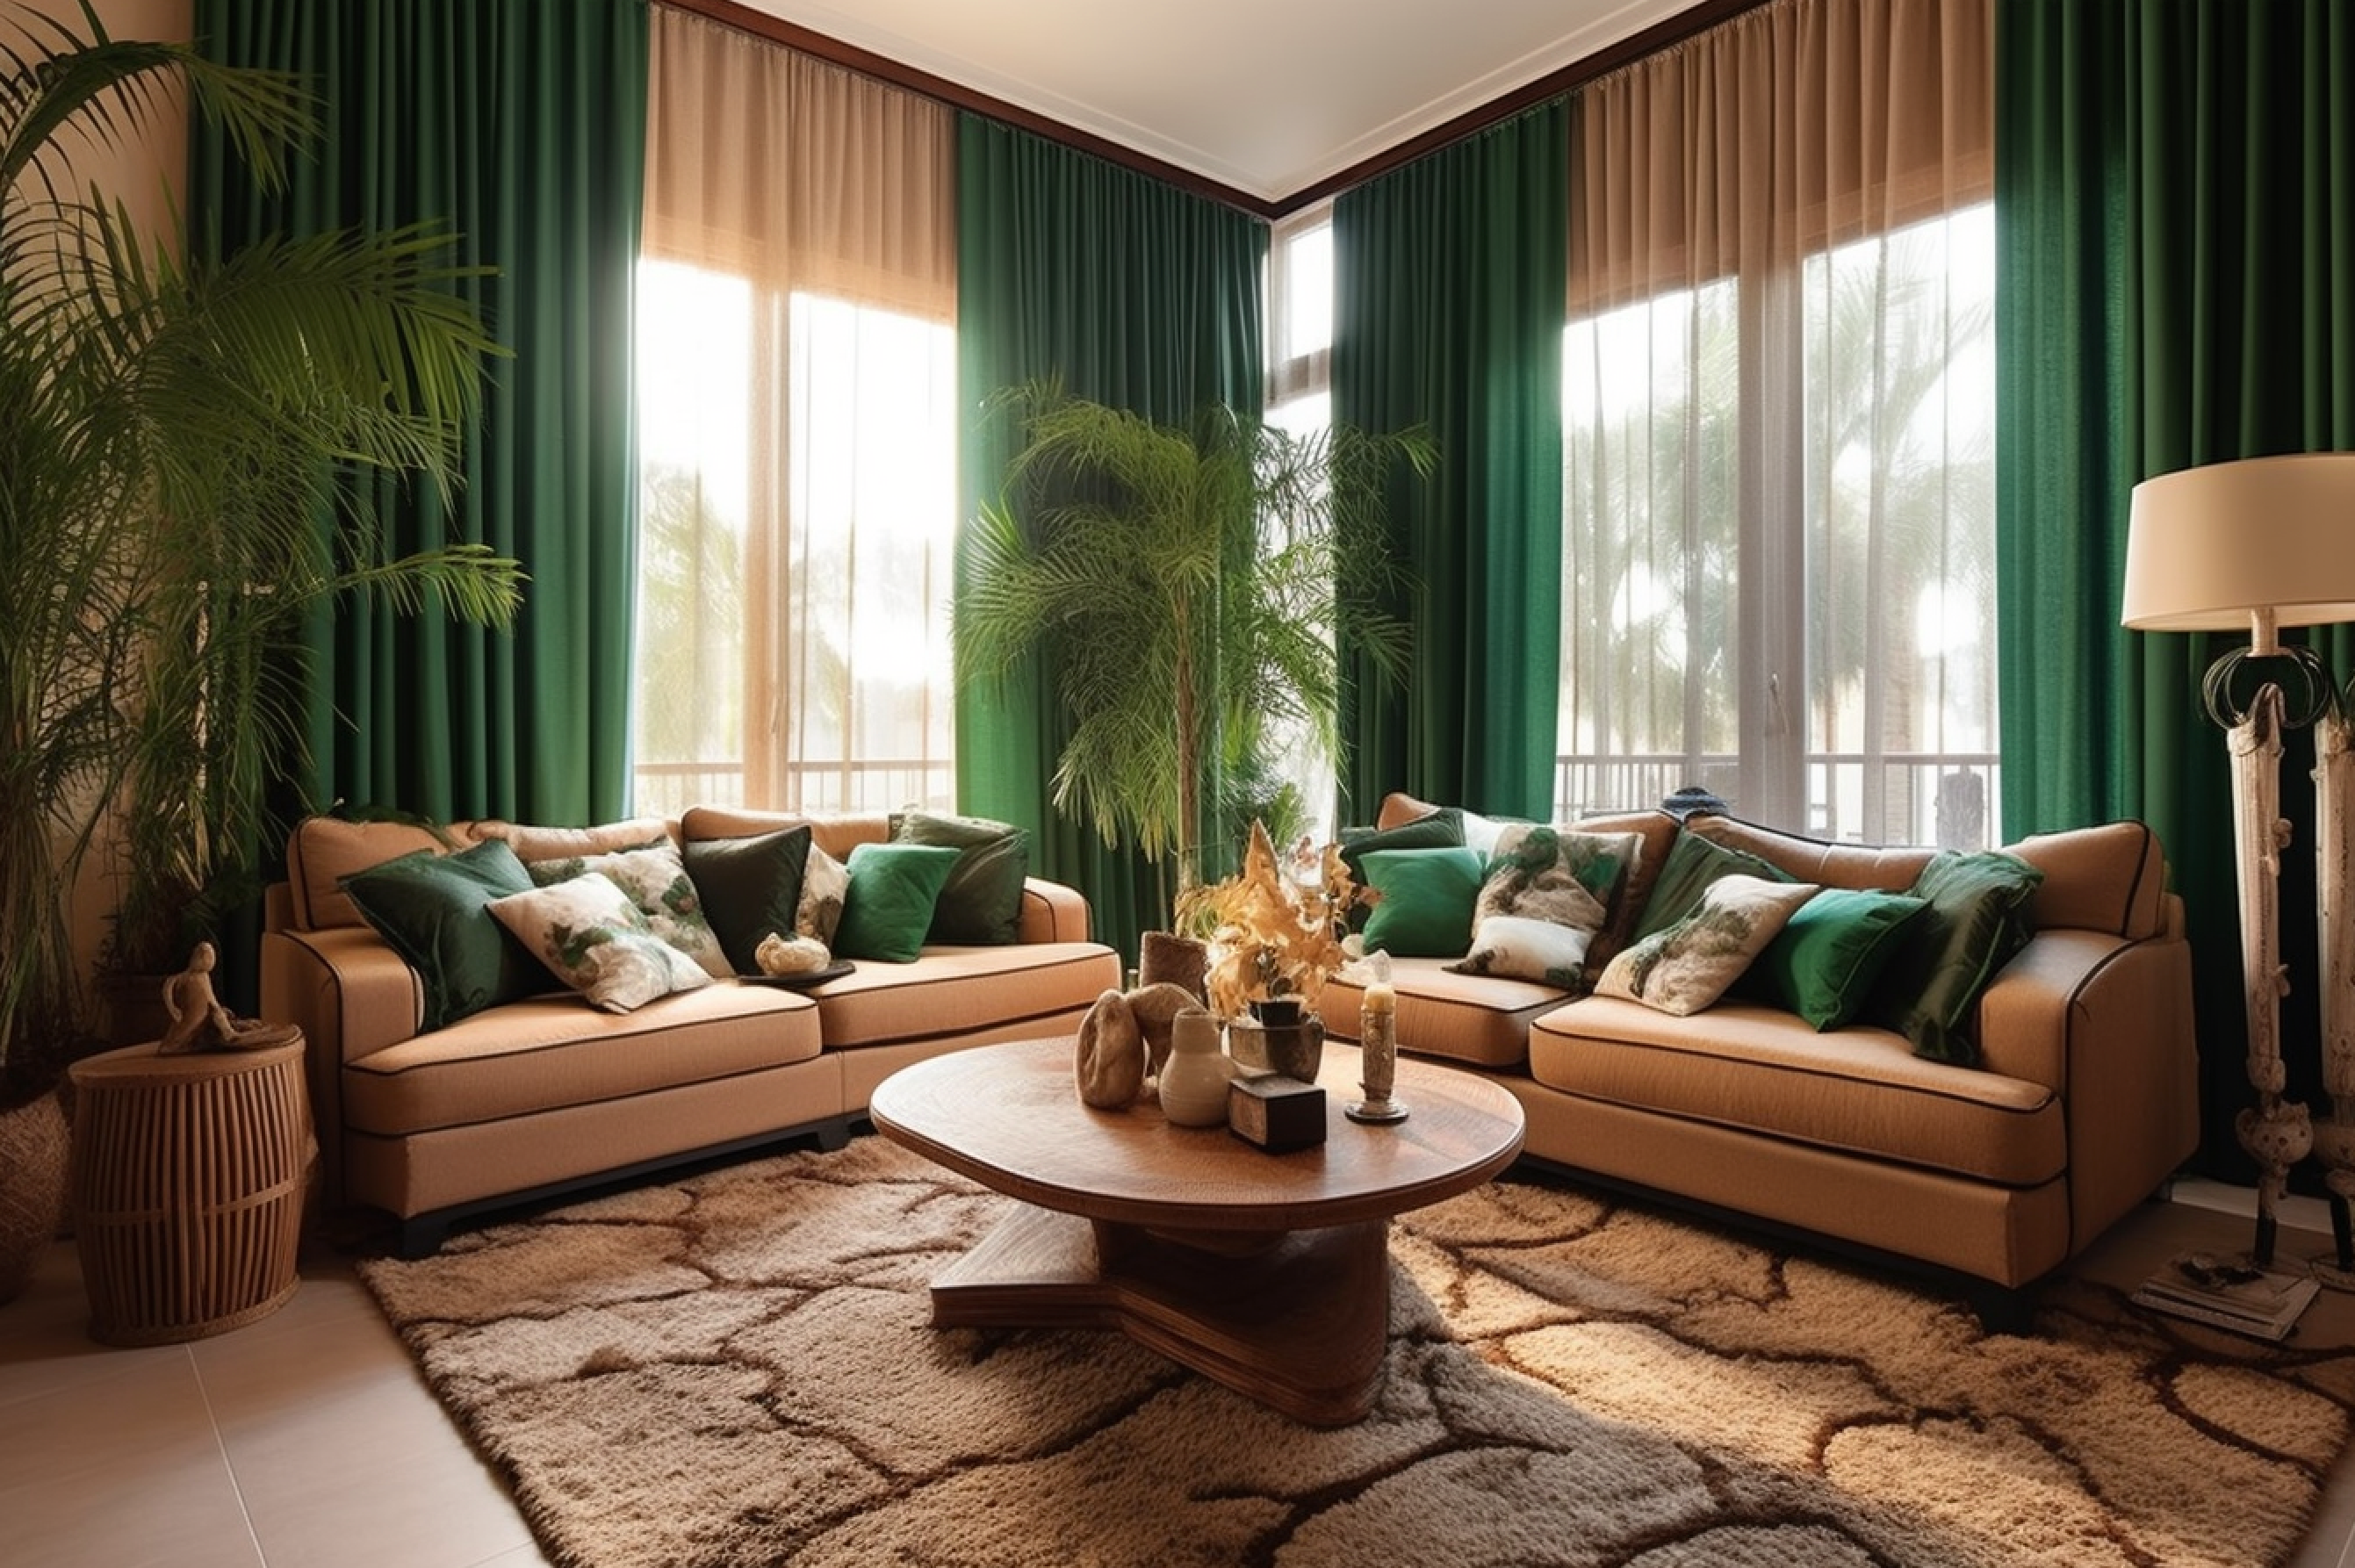 Image of an exotic living room with sandy brown furniture and vibrant emerald green curtains and pillows.